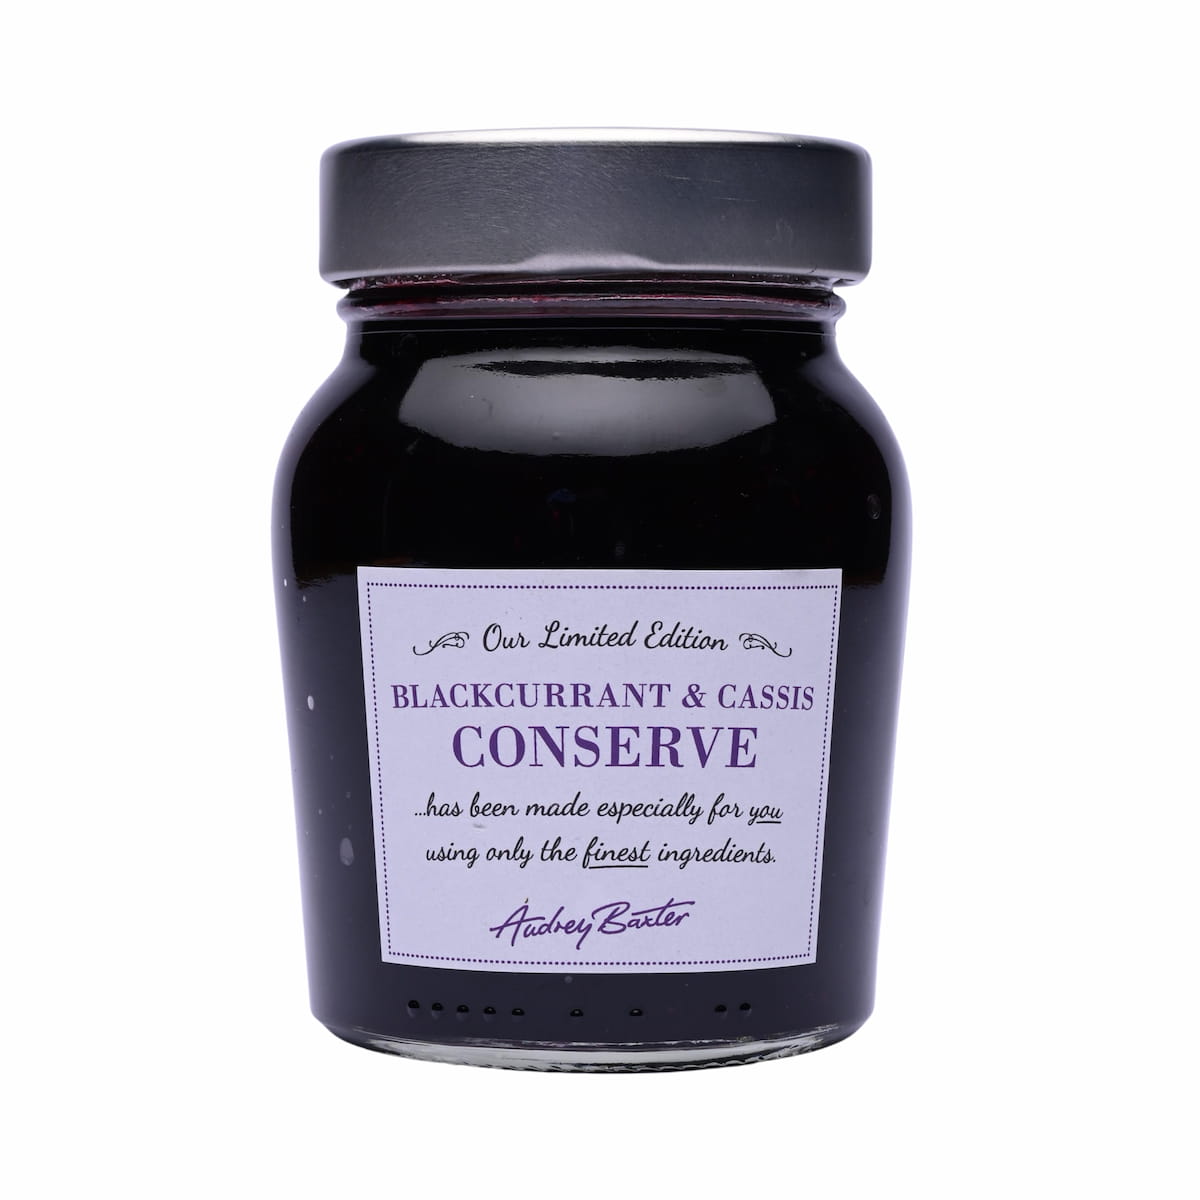 Add 1 x Baxters Limited Edition Blackcurrant and Cassis Conserve